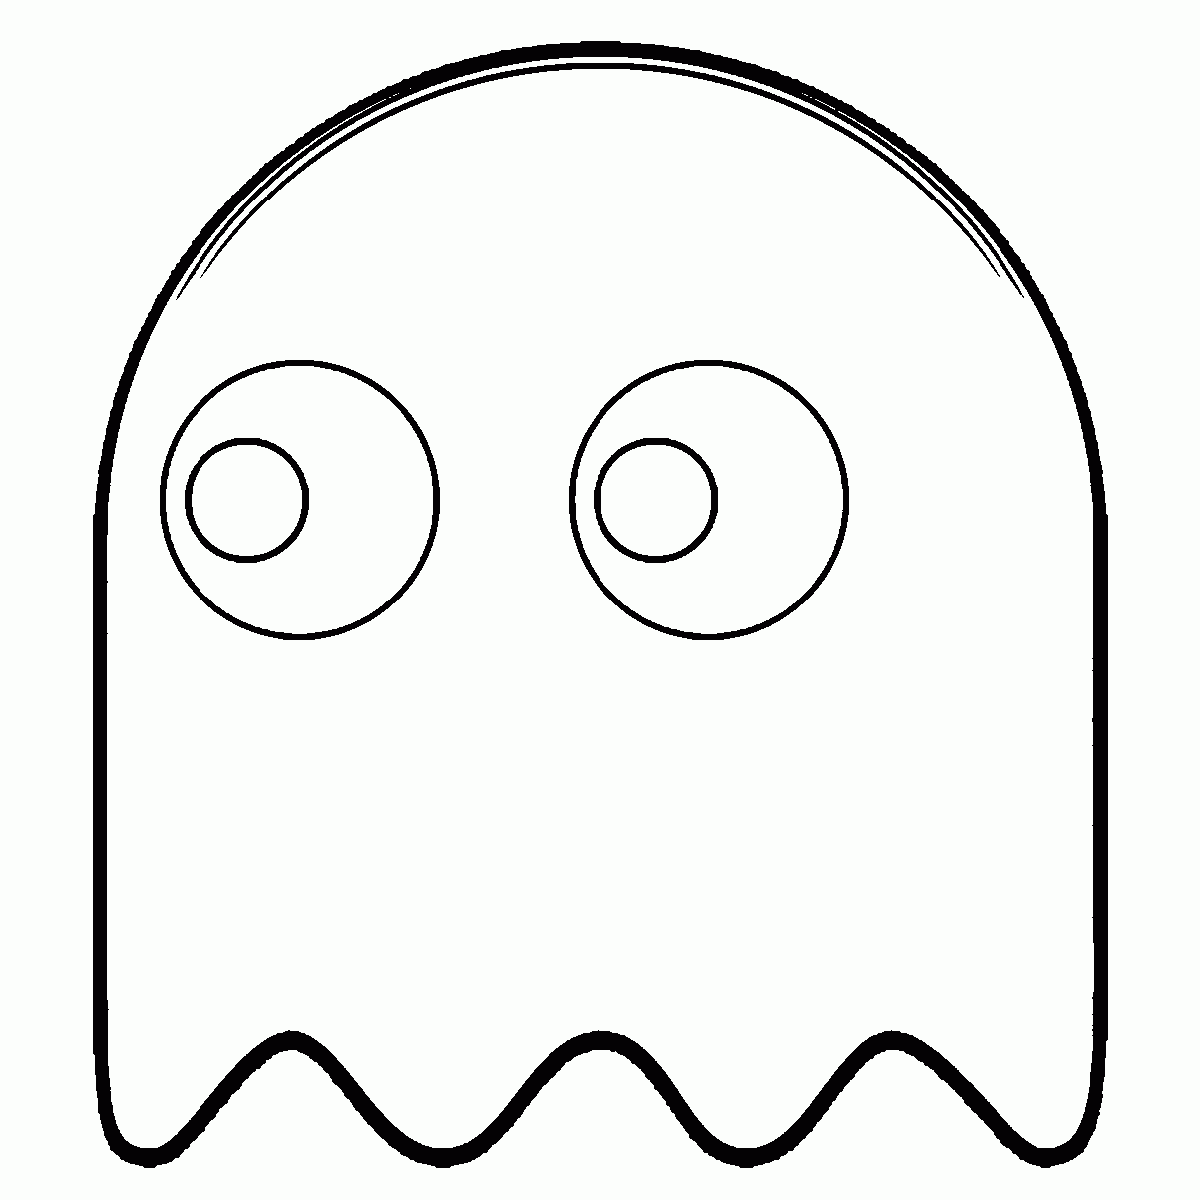 Pacman Coloring Pages Ghostly 1980 Educative Printable Coloring Pages Pacman Templates Printable Free